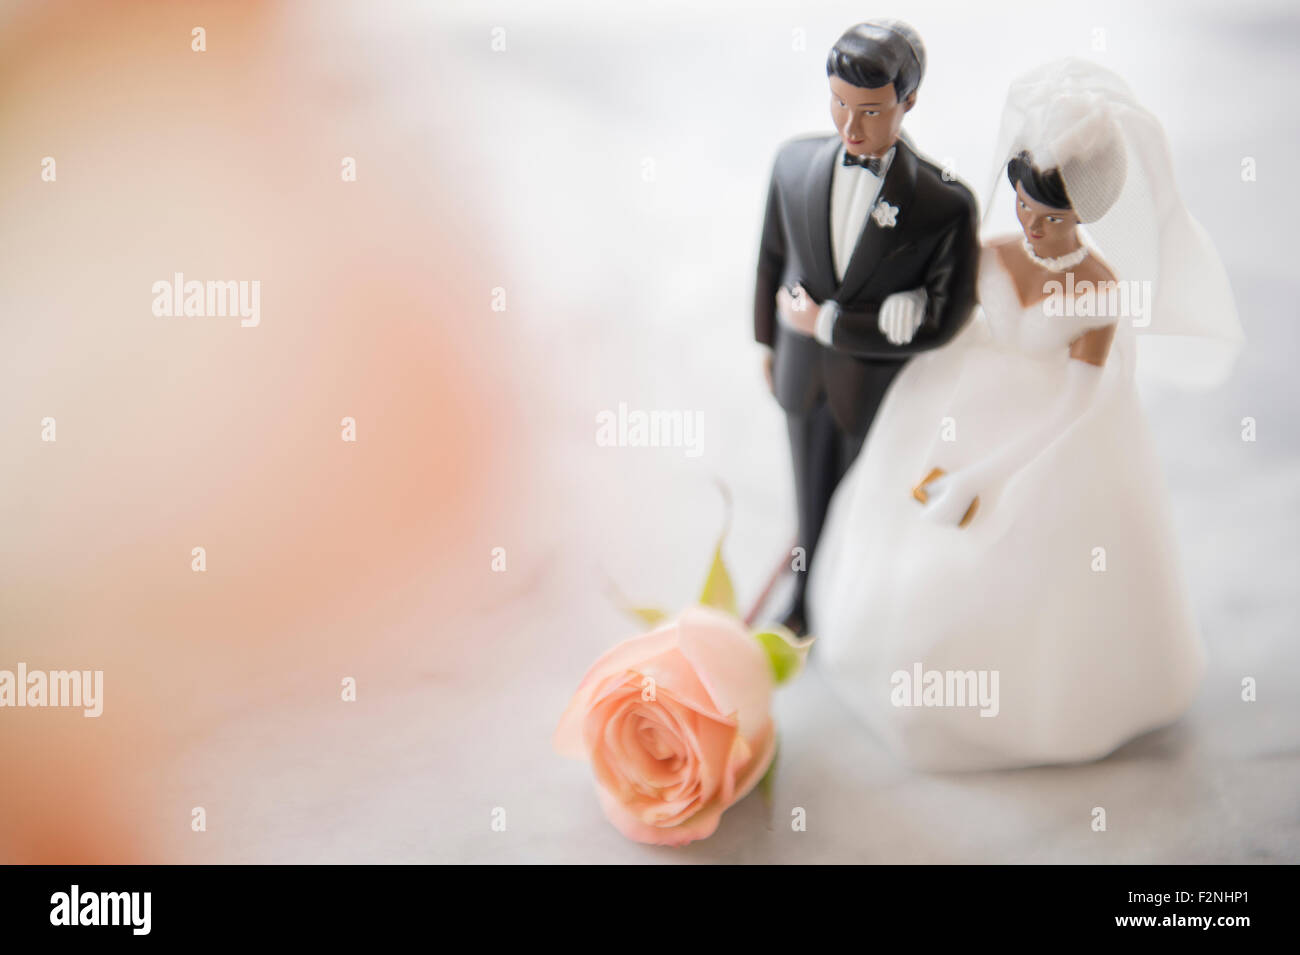 Close up of bride and groom wedding cake topper Stock Photo